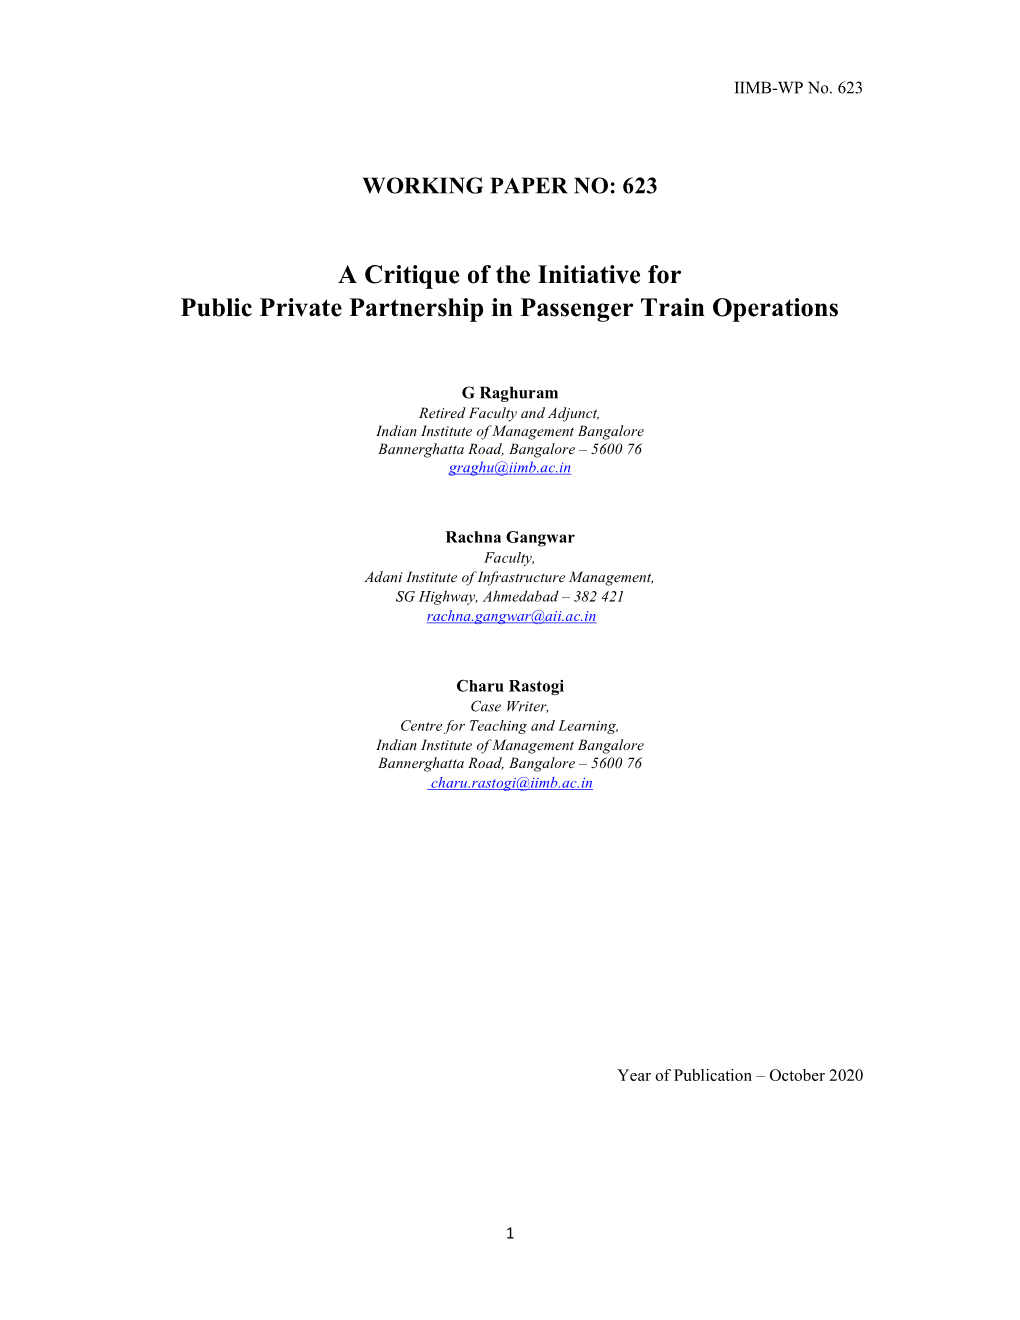 A Critique of the Initiative for Public Private Partnership in Passenger Train Operations